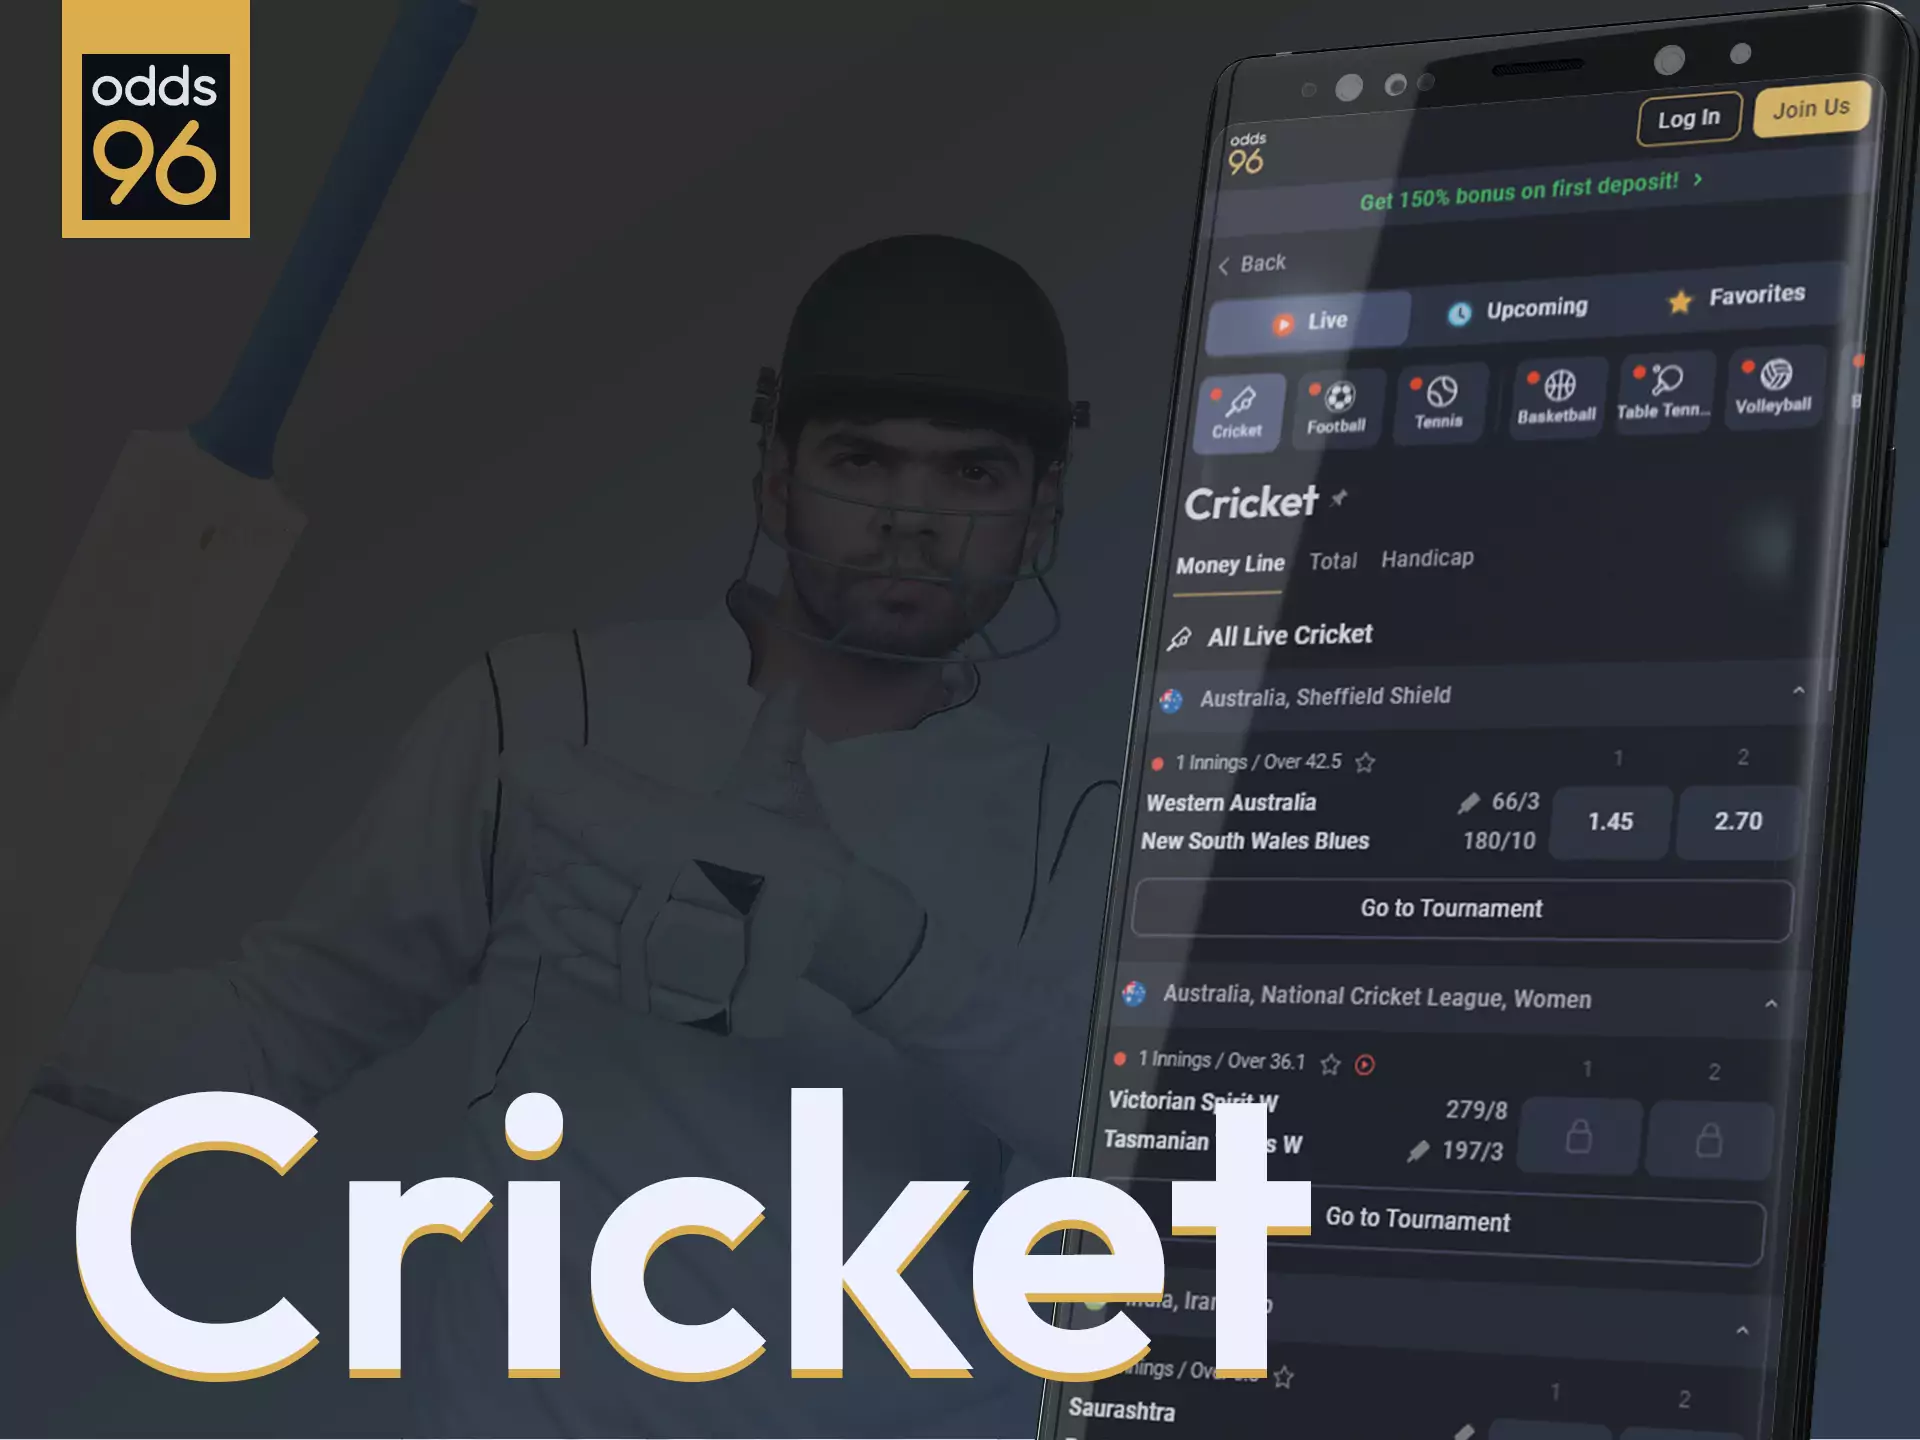 Place bets on cricket in Odds96.